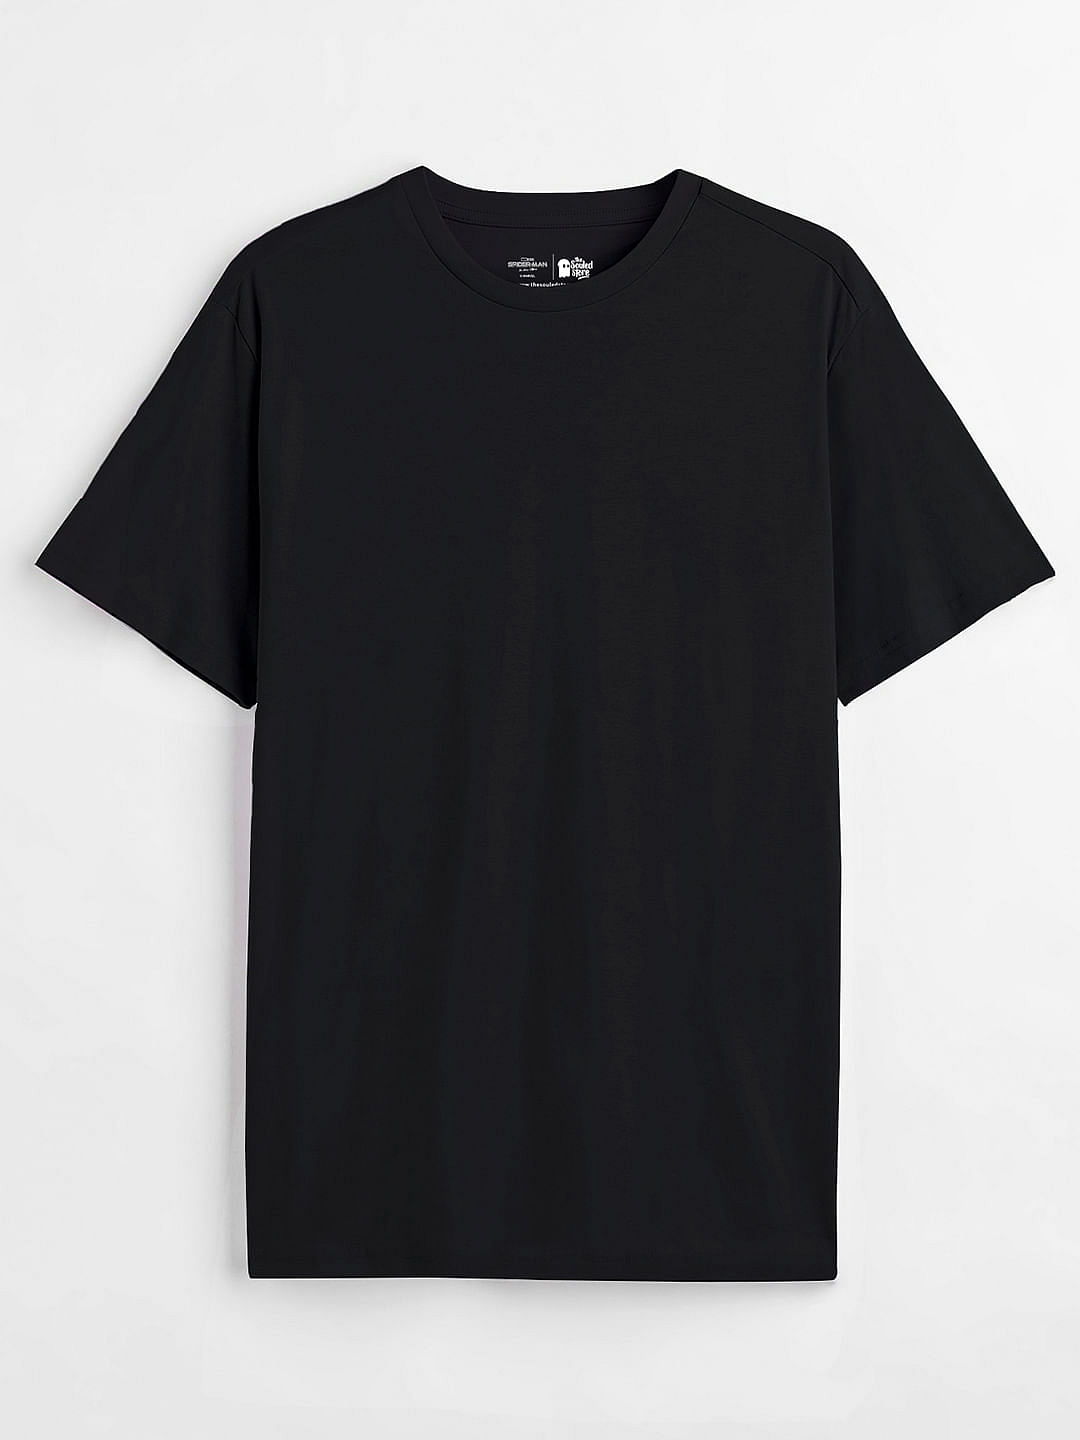 Buy Solids: Black T-Shirts, Unisex T-shirts online at The Souled Store.